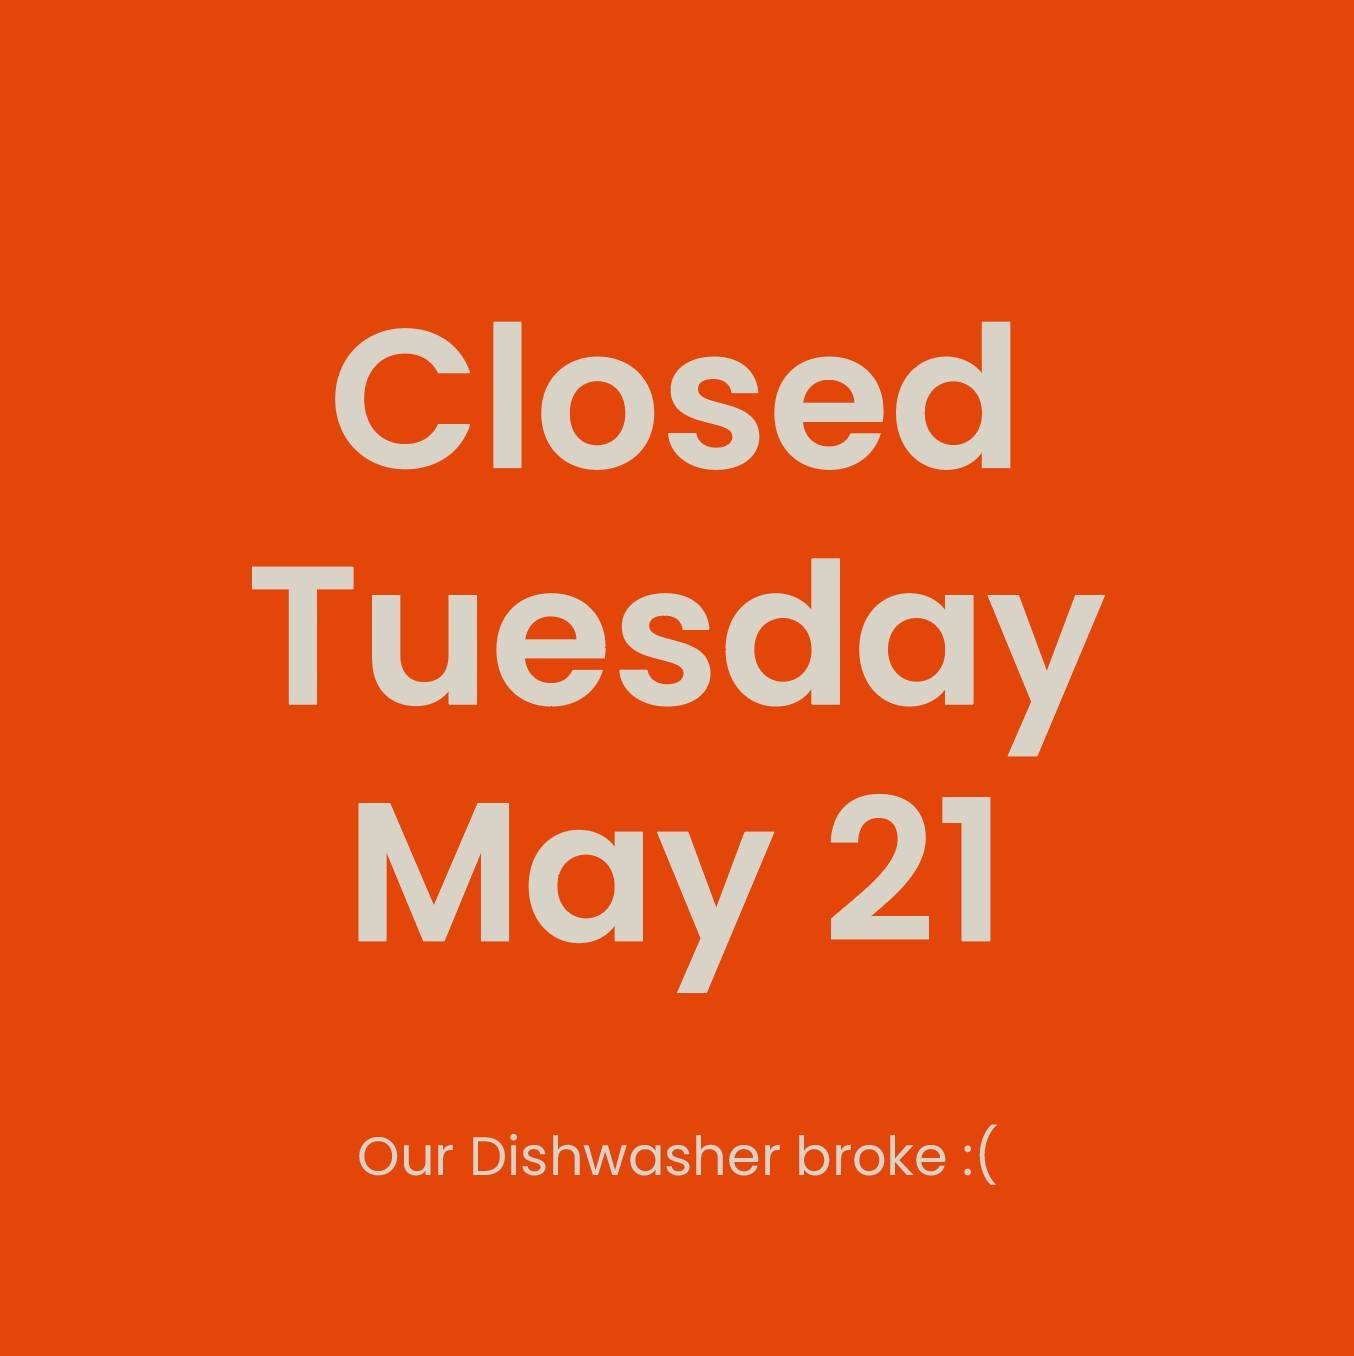 Our dishwasher couldn't keep up 🍽️ We will be closed Tuesday, May 21. See you Wednesday! ⁠
⁠
#relishmuskoka